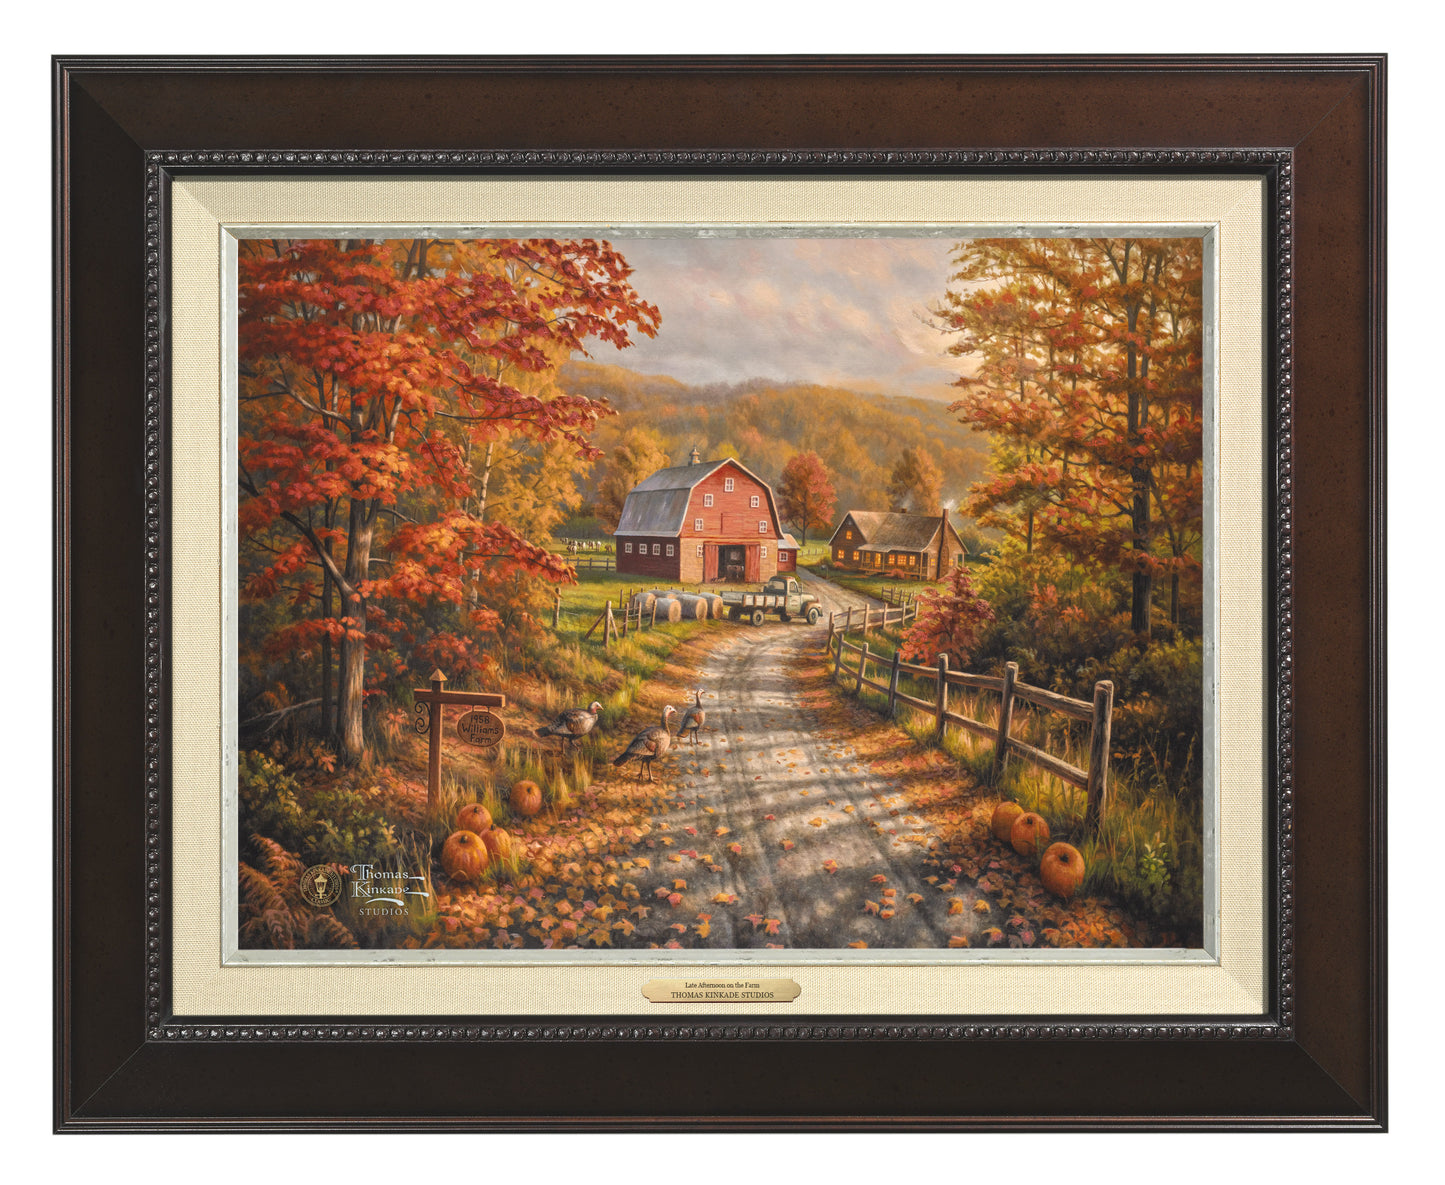 161462_CLF Late Afternoon on the Farm 12X16 Classic - Expresso.jpg